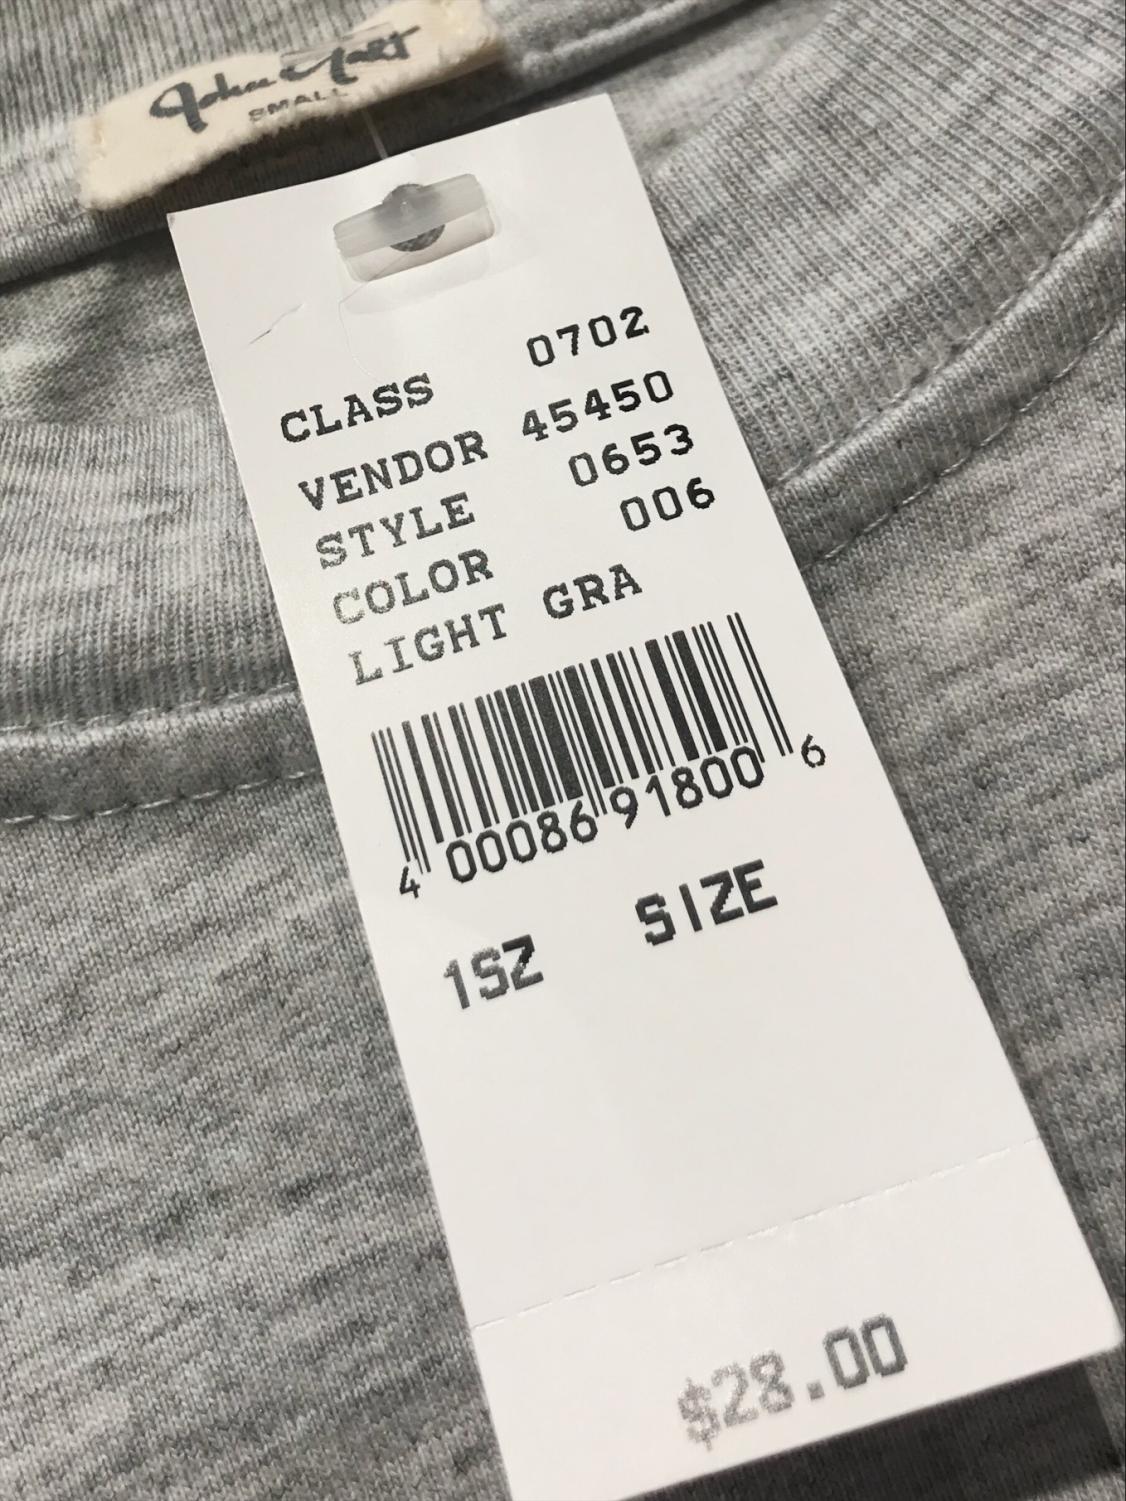 One size never fits most: Brandy Melville is damaging young